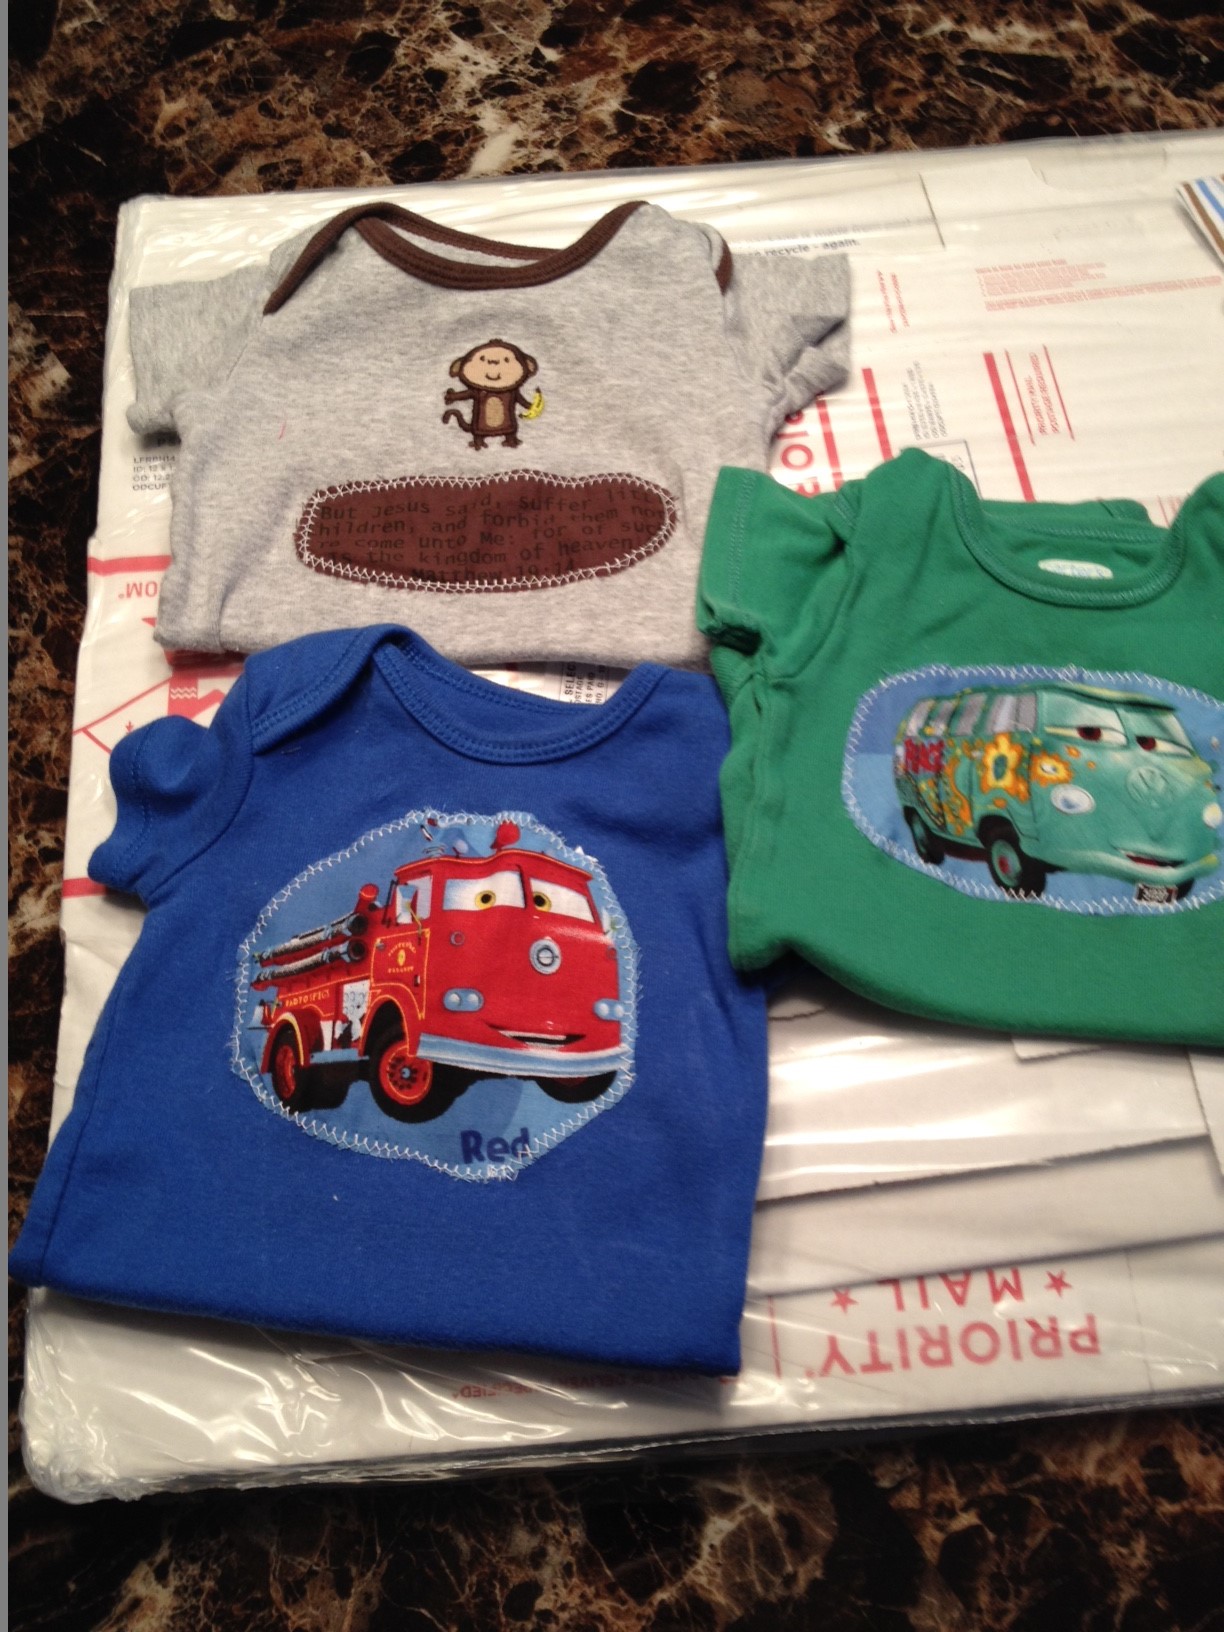 Baby Onesies - size 3 months, set of 3